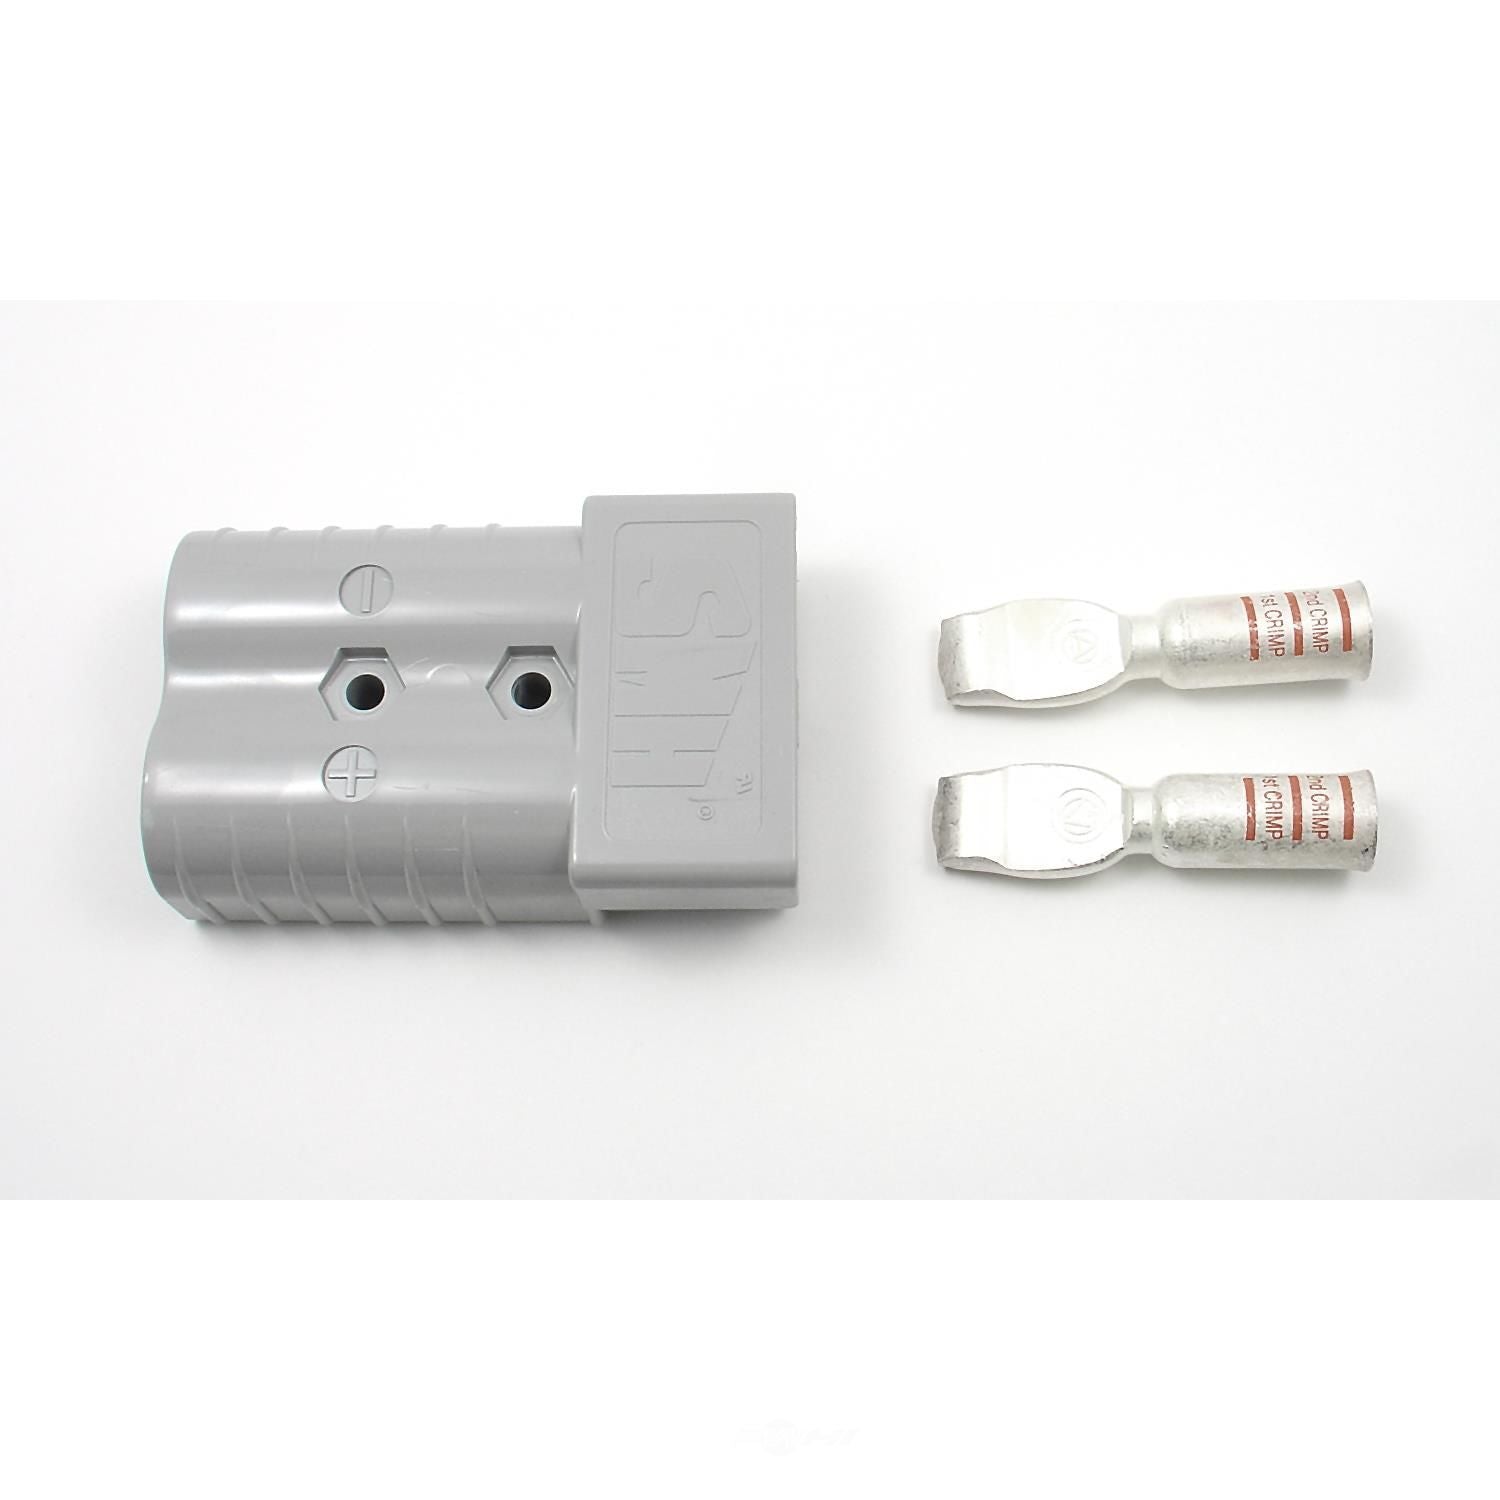 YSP BA104KGY Wells Quick Connect Battery Coupler with Terminals (350A, 2/0G)